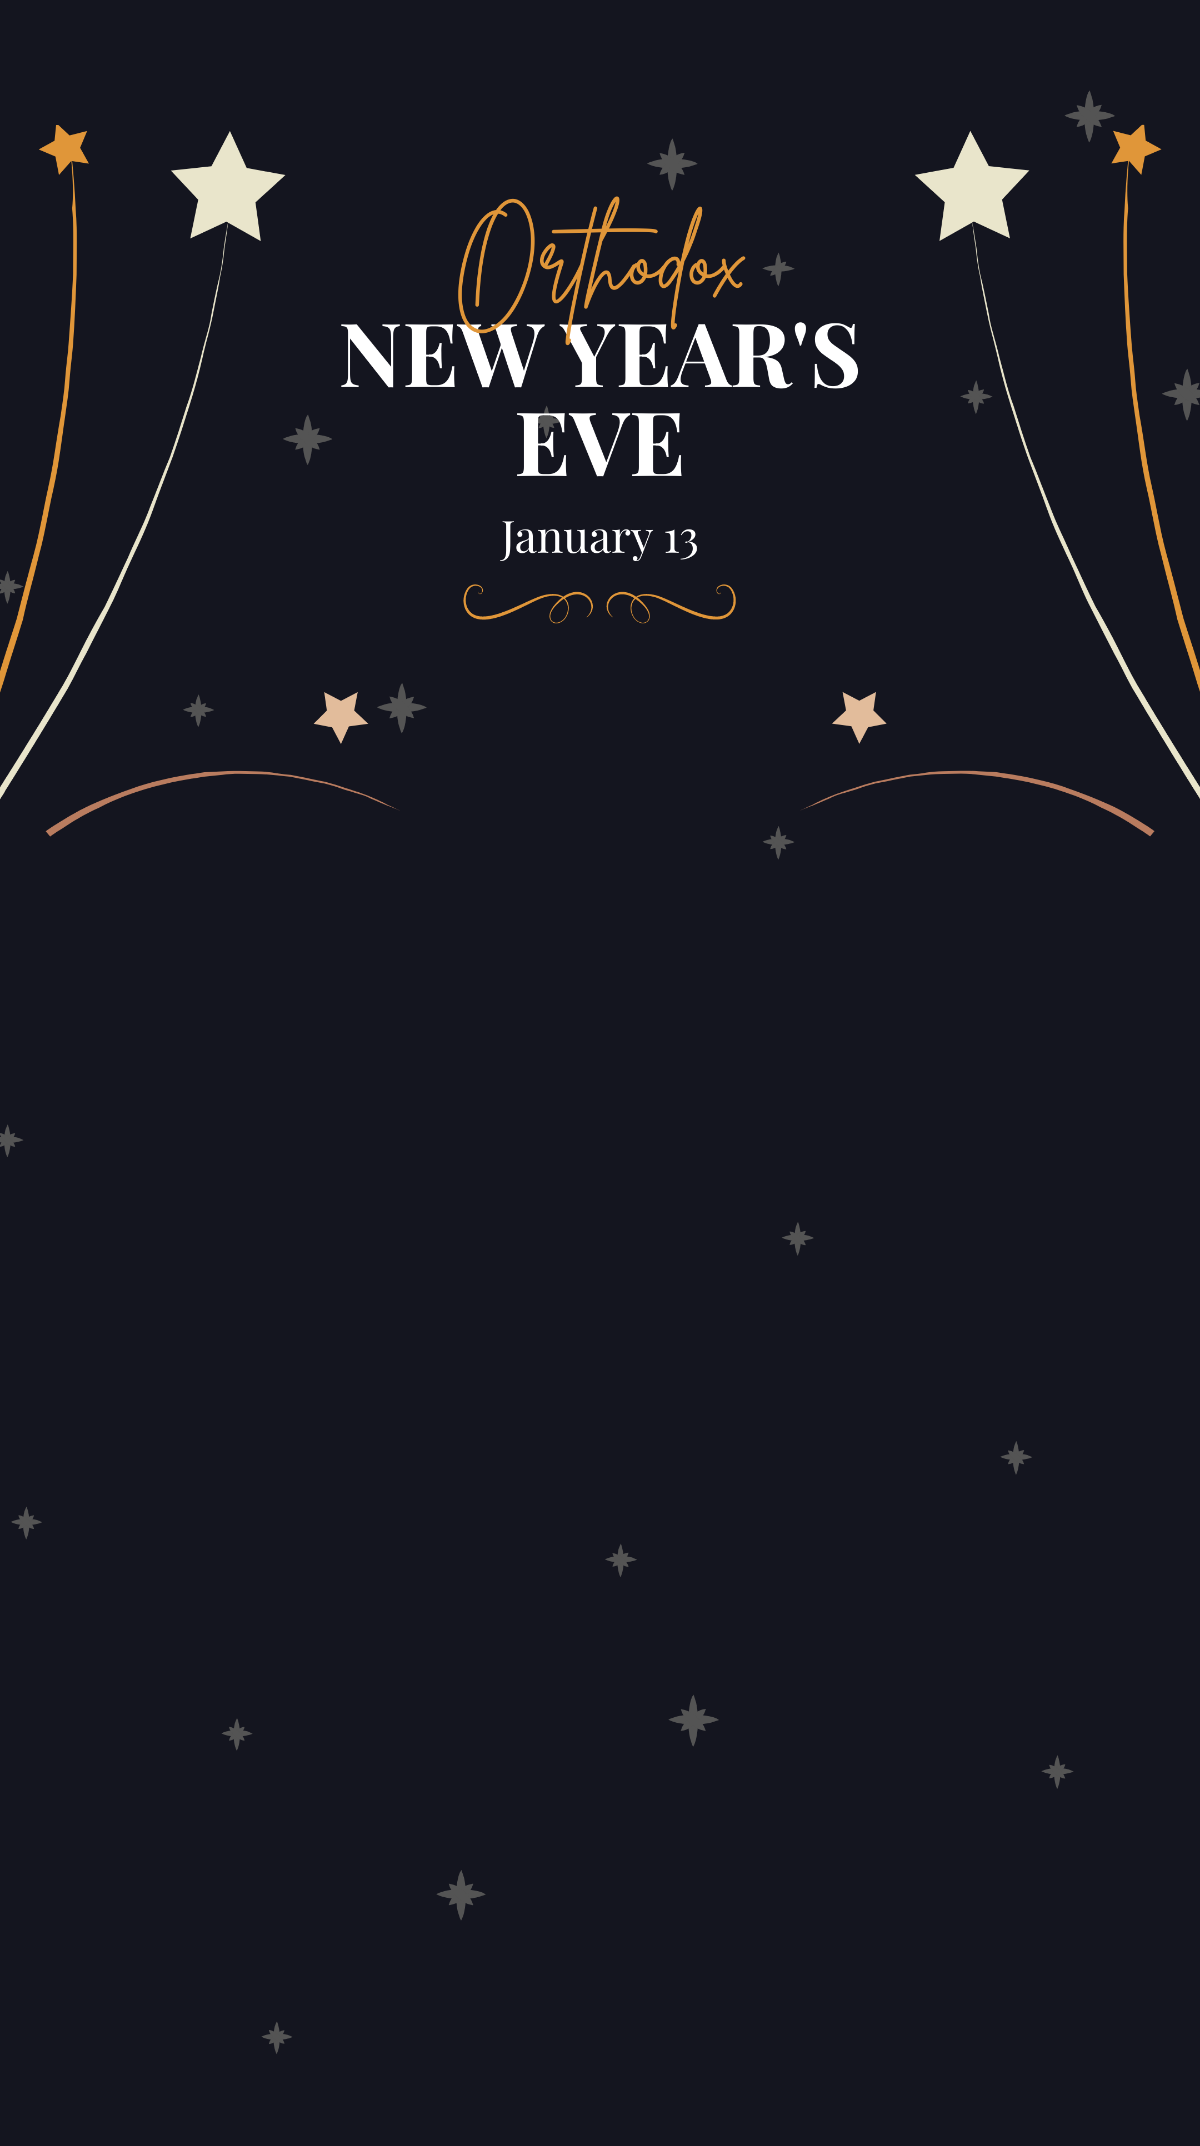 Orthodox New Year Eve Snapchat Geofilter Template